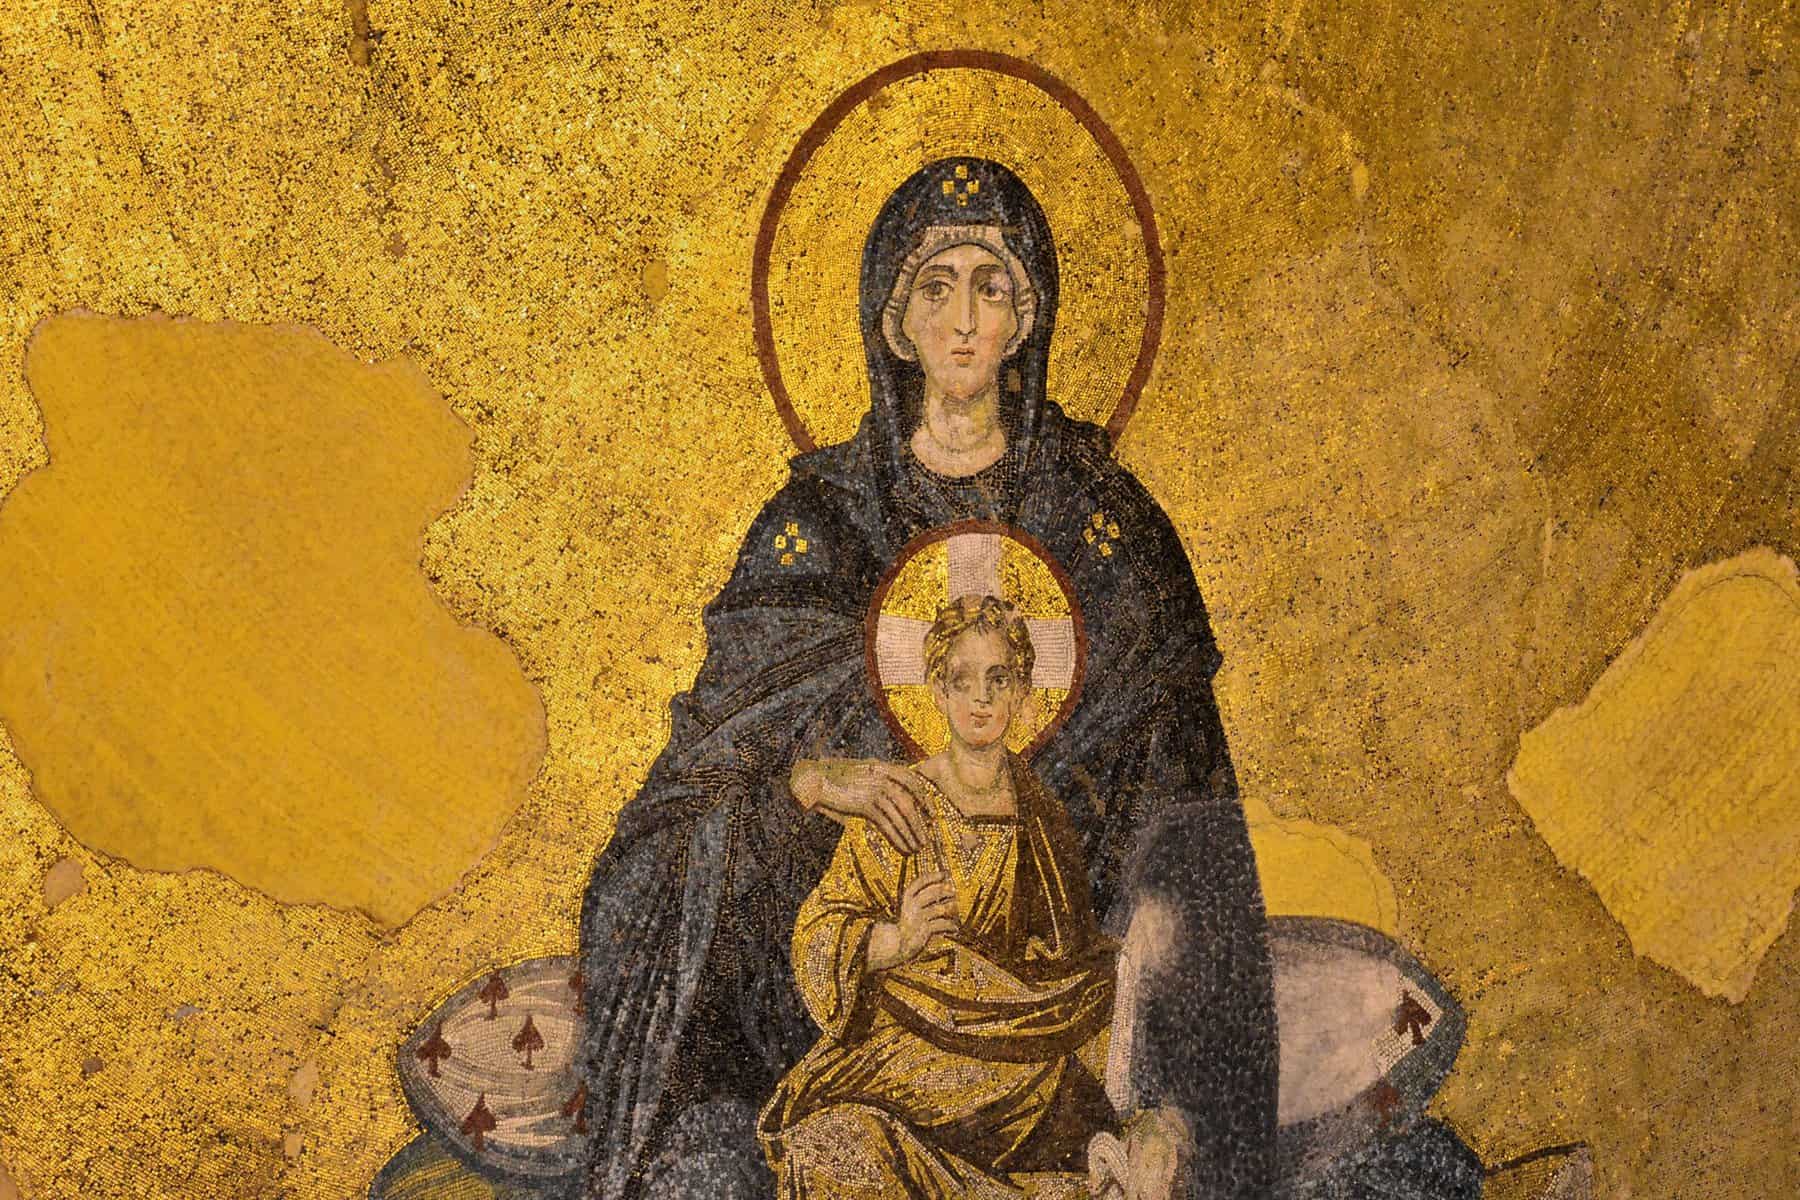 An icon of Mary and the Christ child is shown.